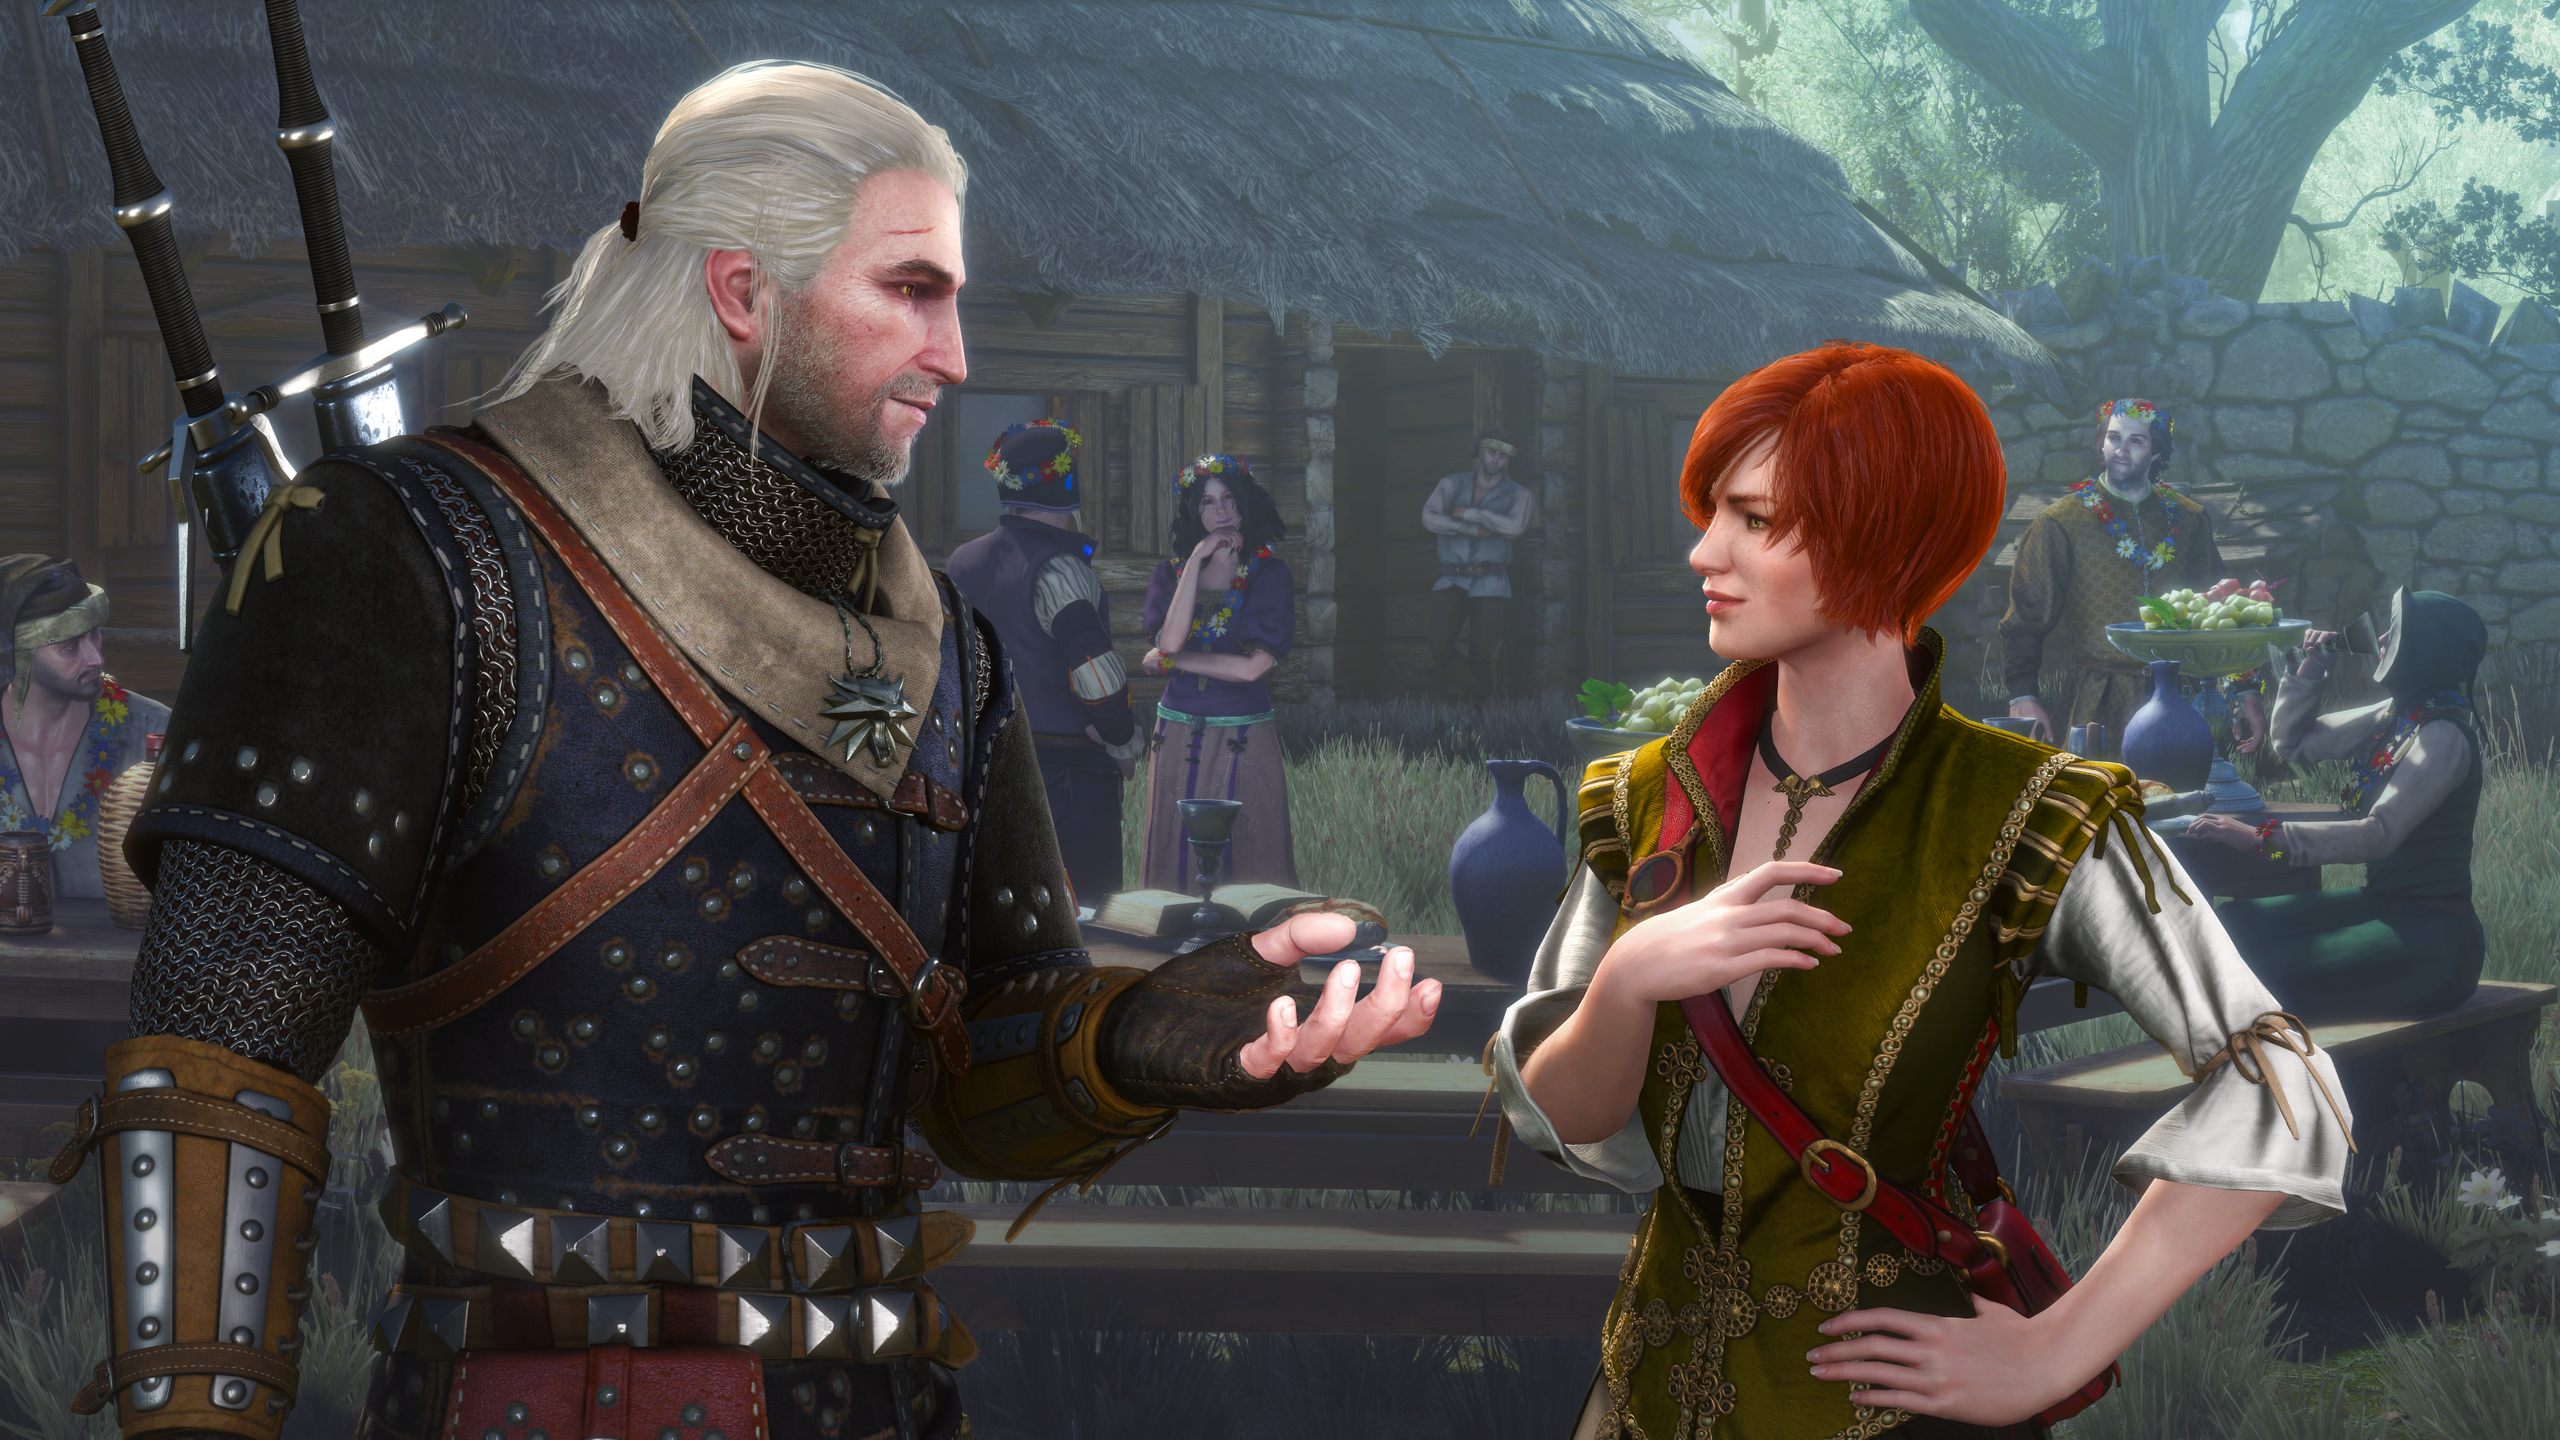 General 2560x1440 The Witcher The Witcher 3: Wild Hunt Geralt of Rivia DLC Shani video games The Witcher 3: Wild Hunt – Hearts of Stone CD Projekt RED video game girls video game man RPG PC gaming redhead